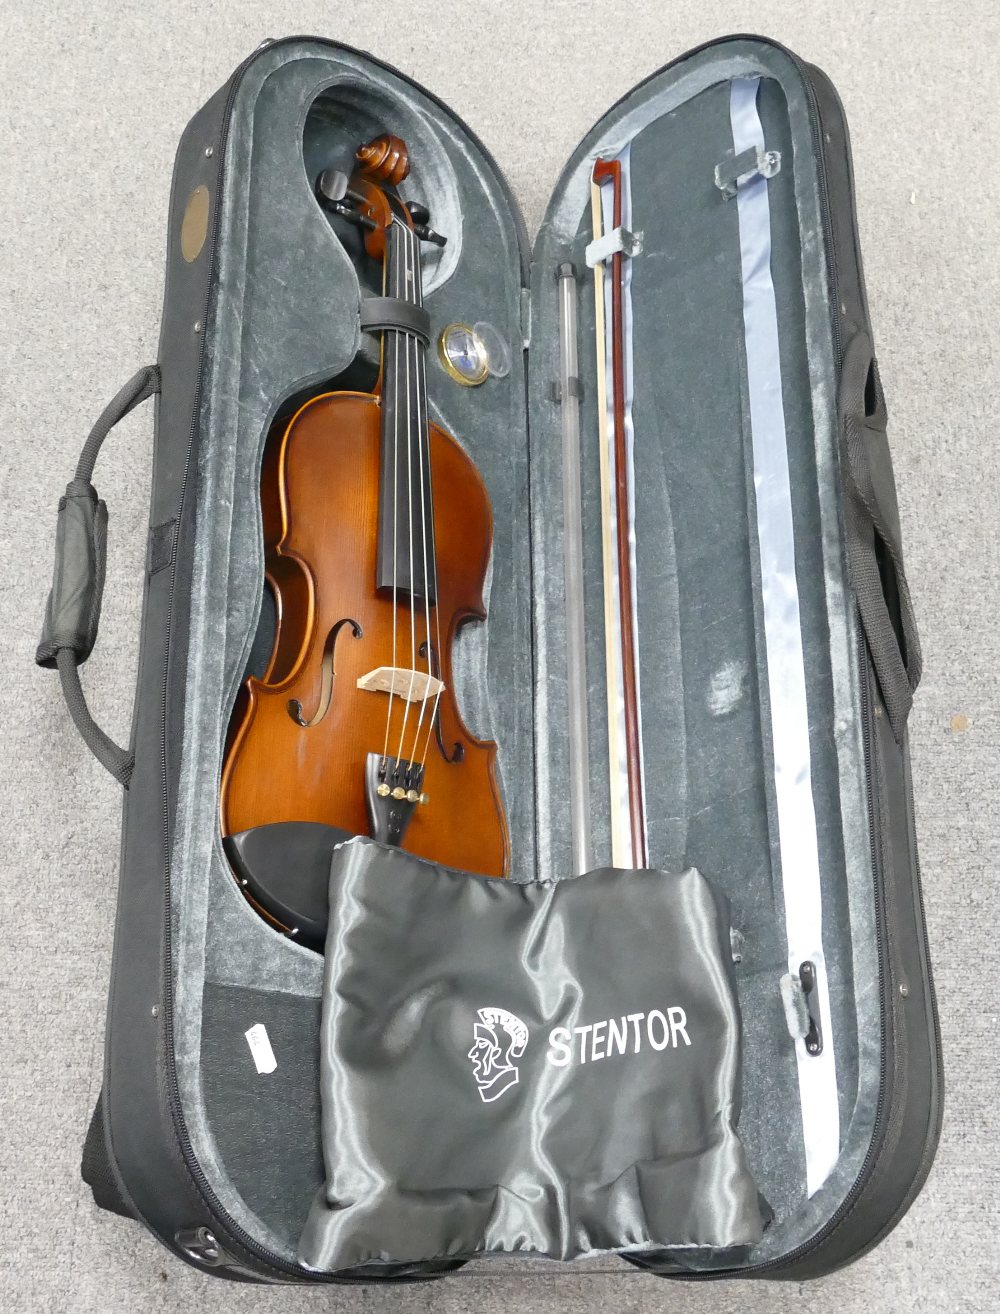 Modern Violin in case with bow: The Stentor Graduate label inside, length at back 37cm, overall 59.